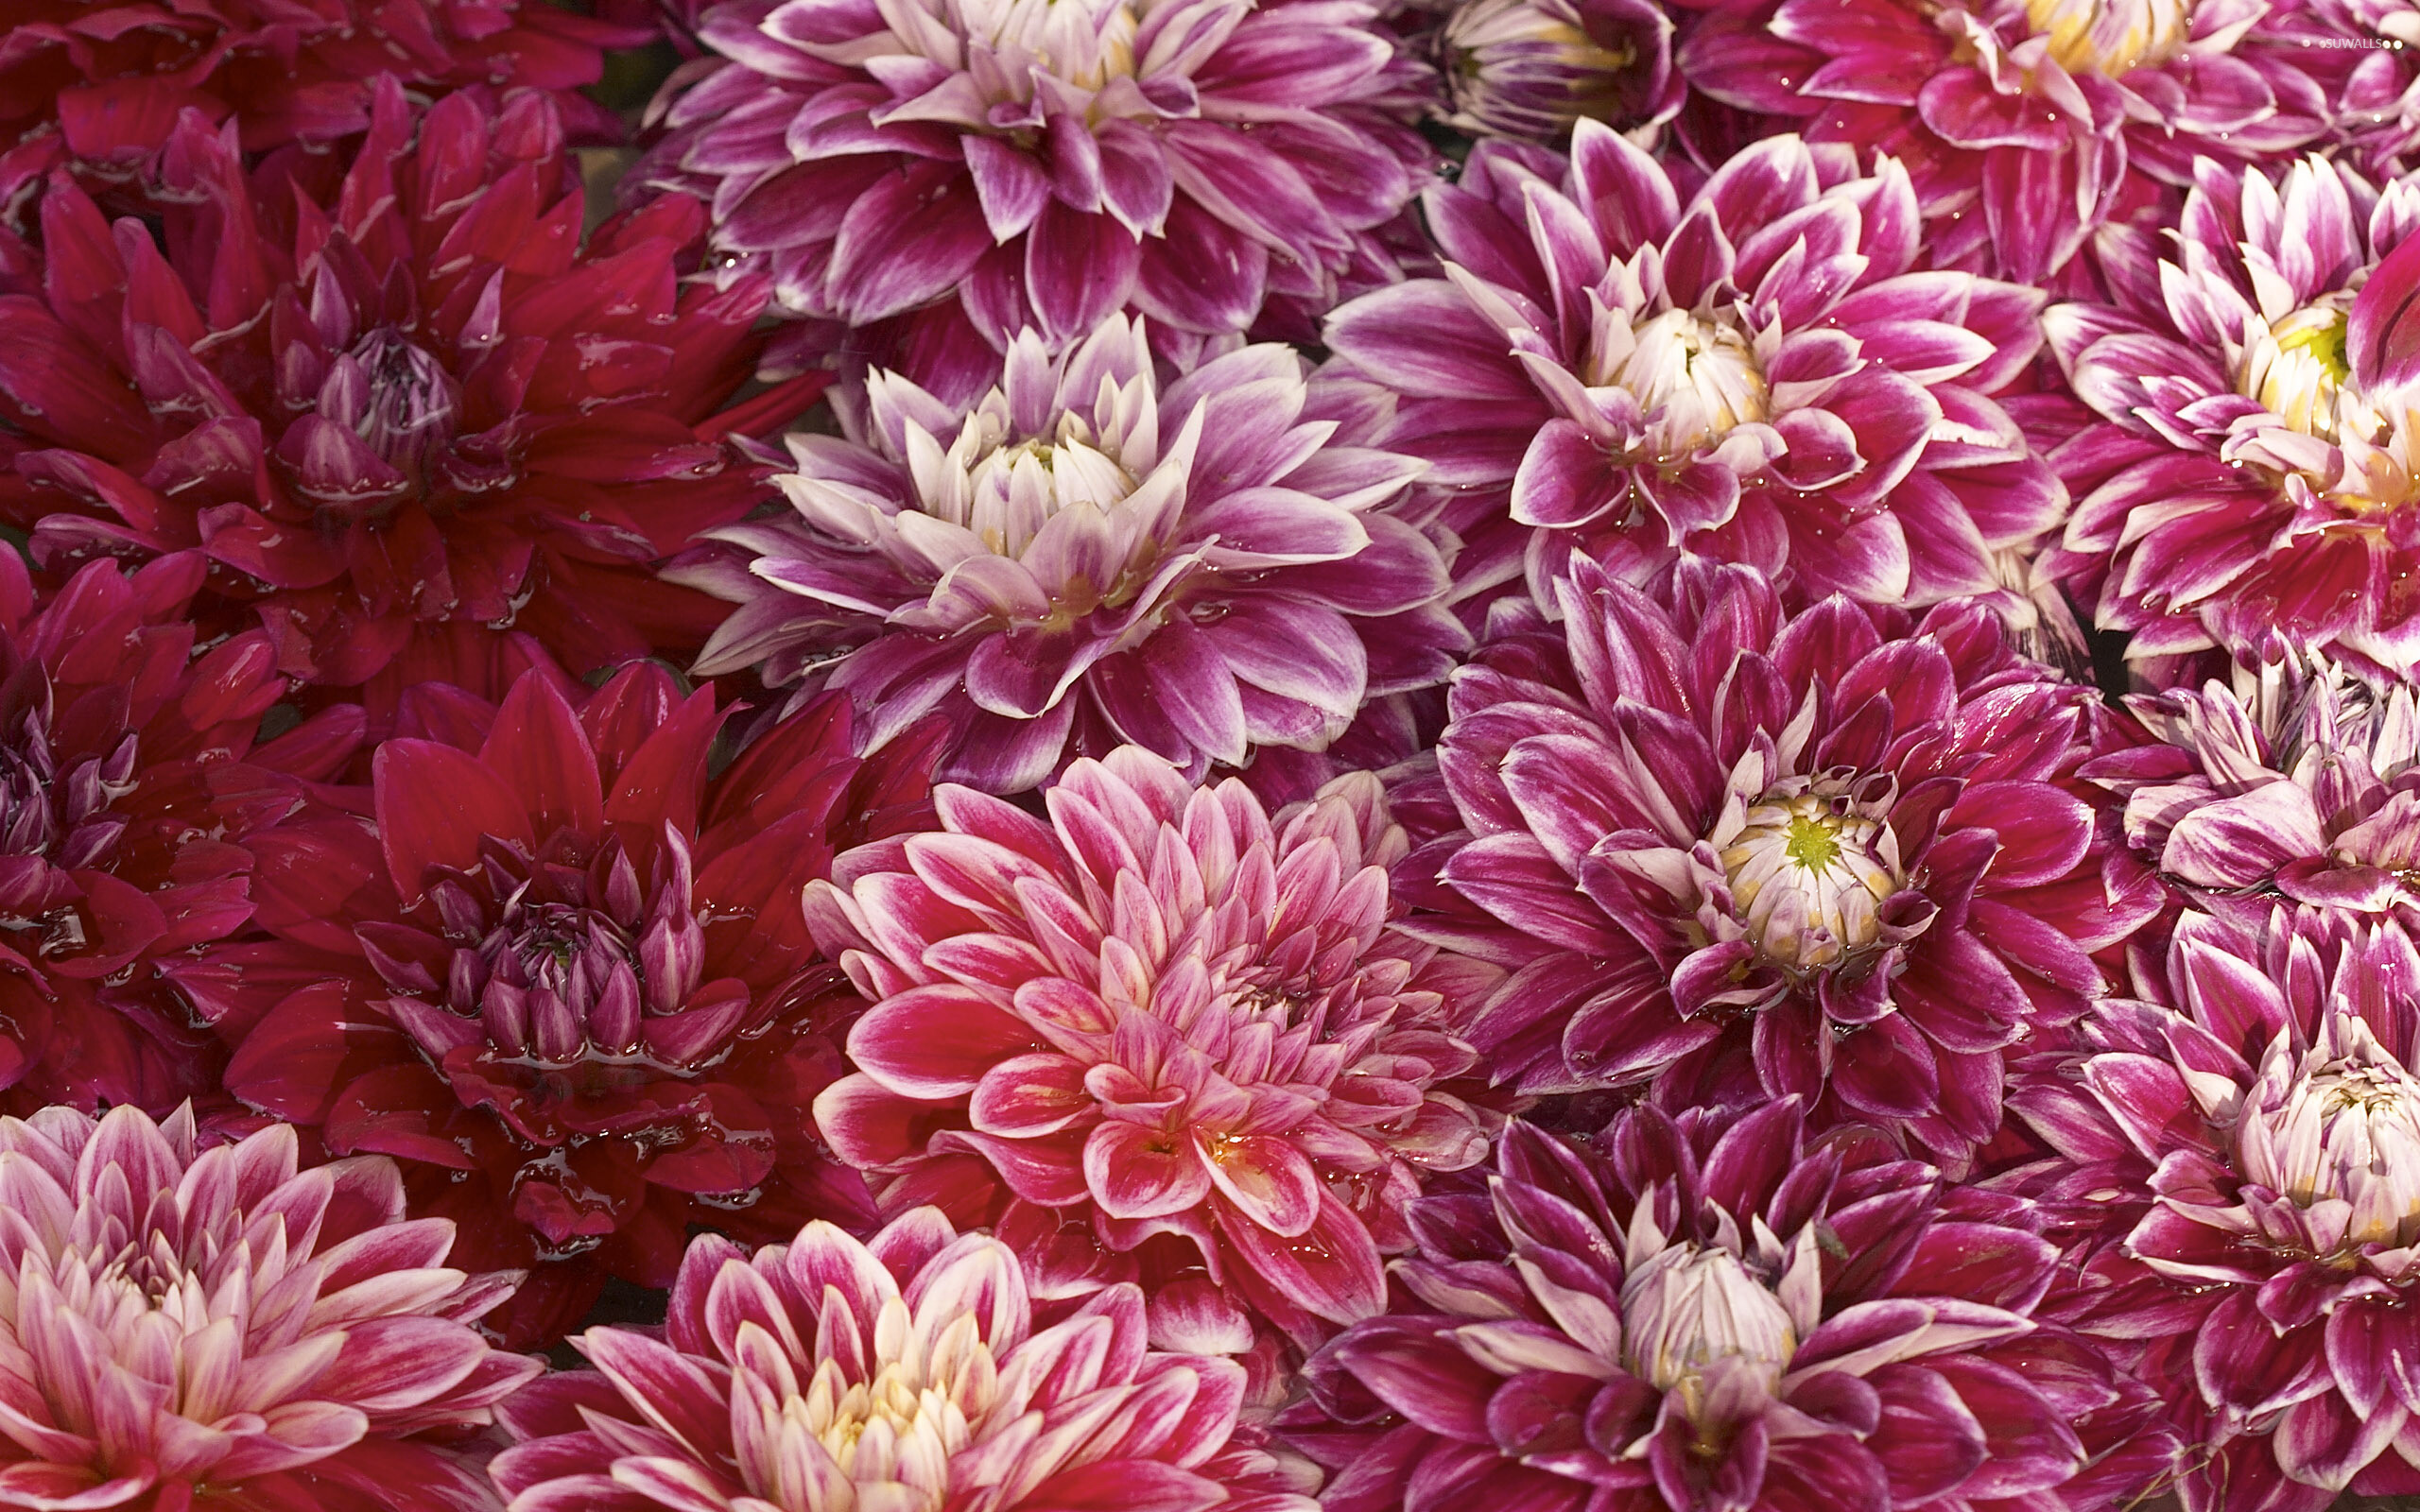 Chrysanthemum: The flower heads occur in various forms and can be daisy-like or decorative, like pompons or buttons. 2560x1600 HD Background.